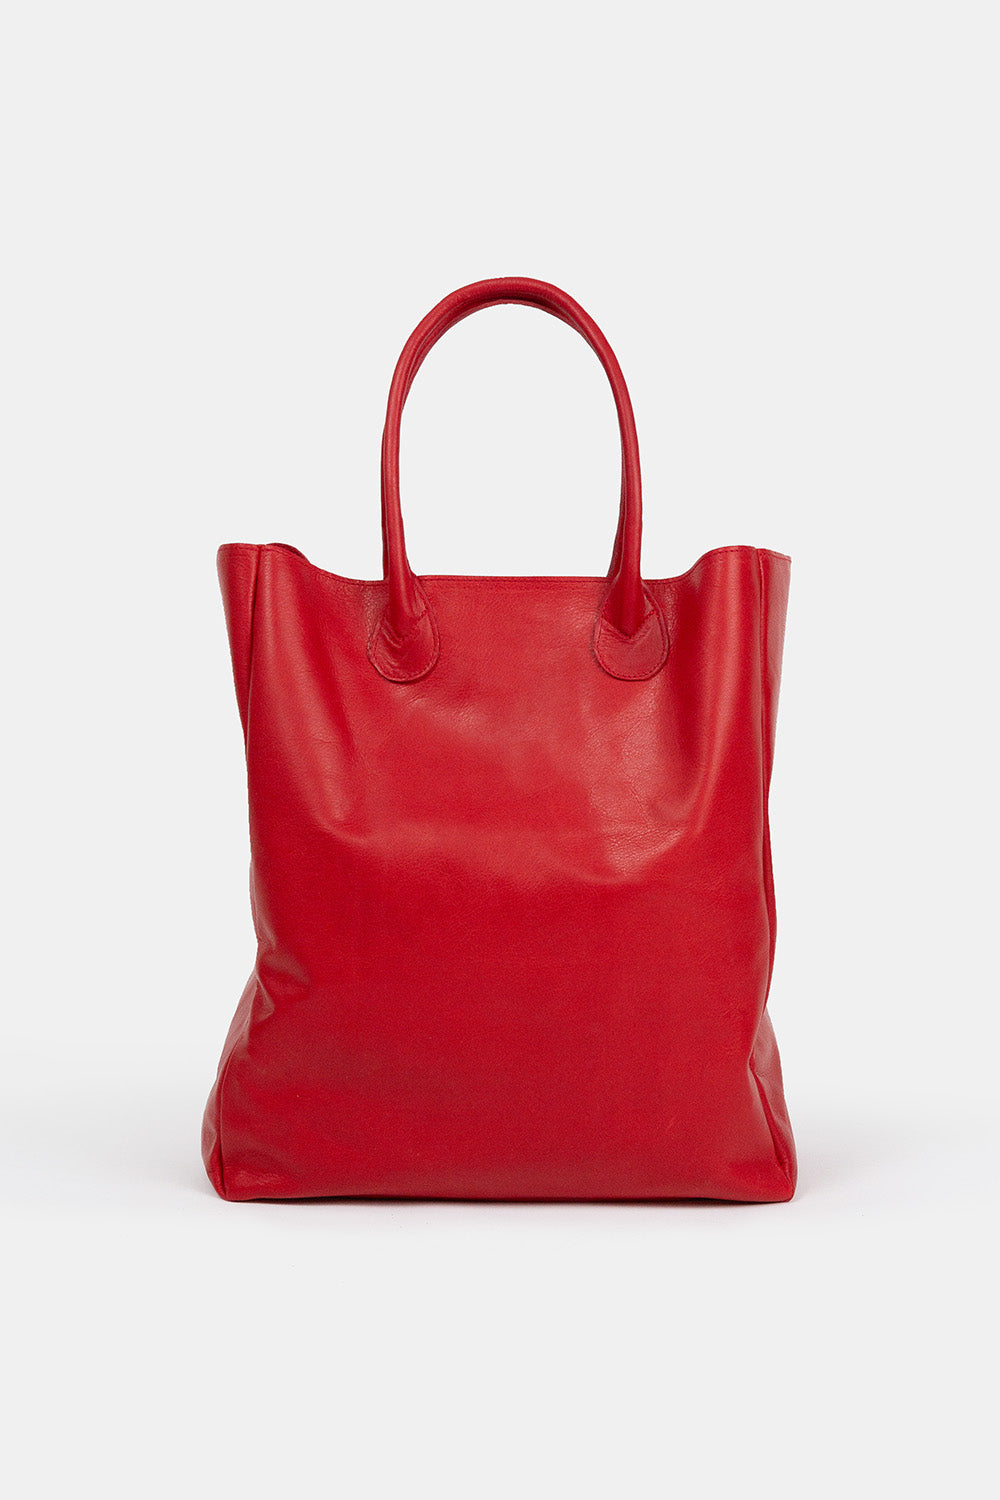 Eve Leather Shopping Tote in Vermilion